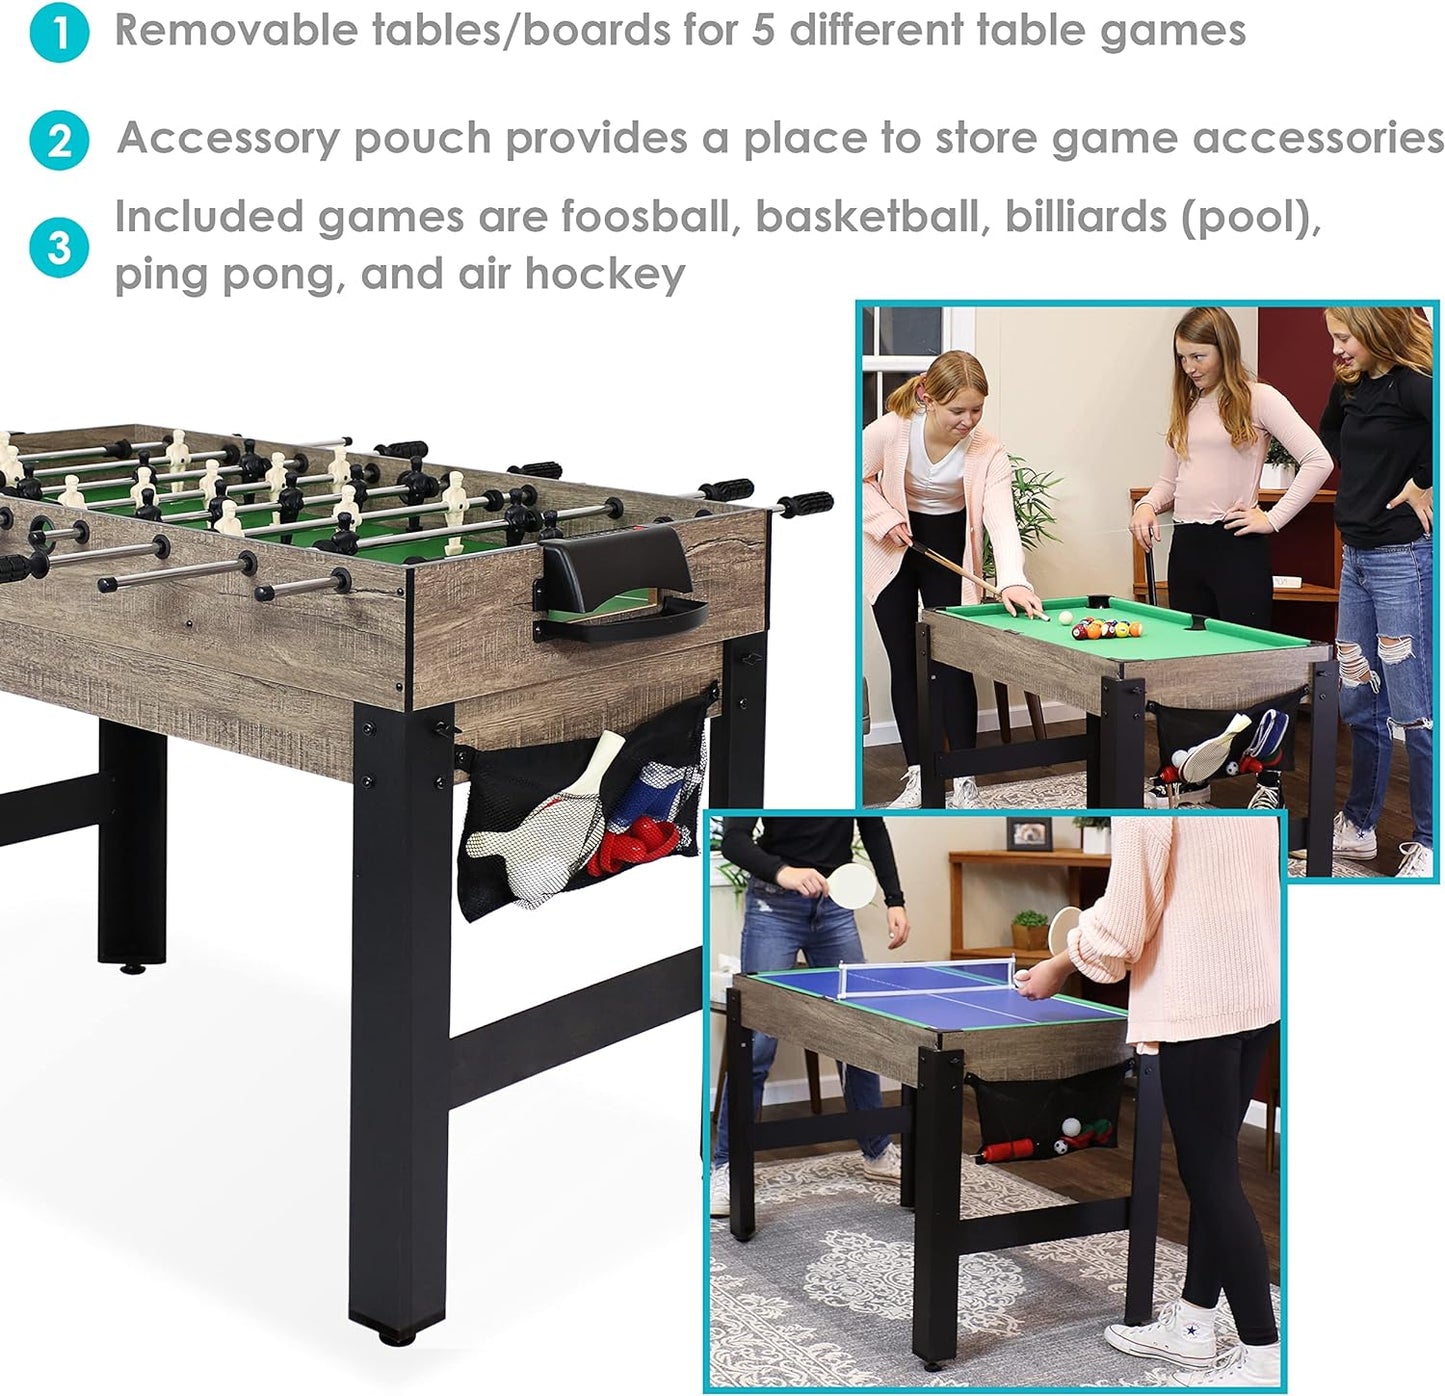 45-Inch 5-In-1 Multi-Game Table - Billiards, Push Hockey, Foosball, Ping Pong, and Basketball - Weathered Gray